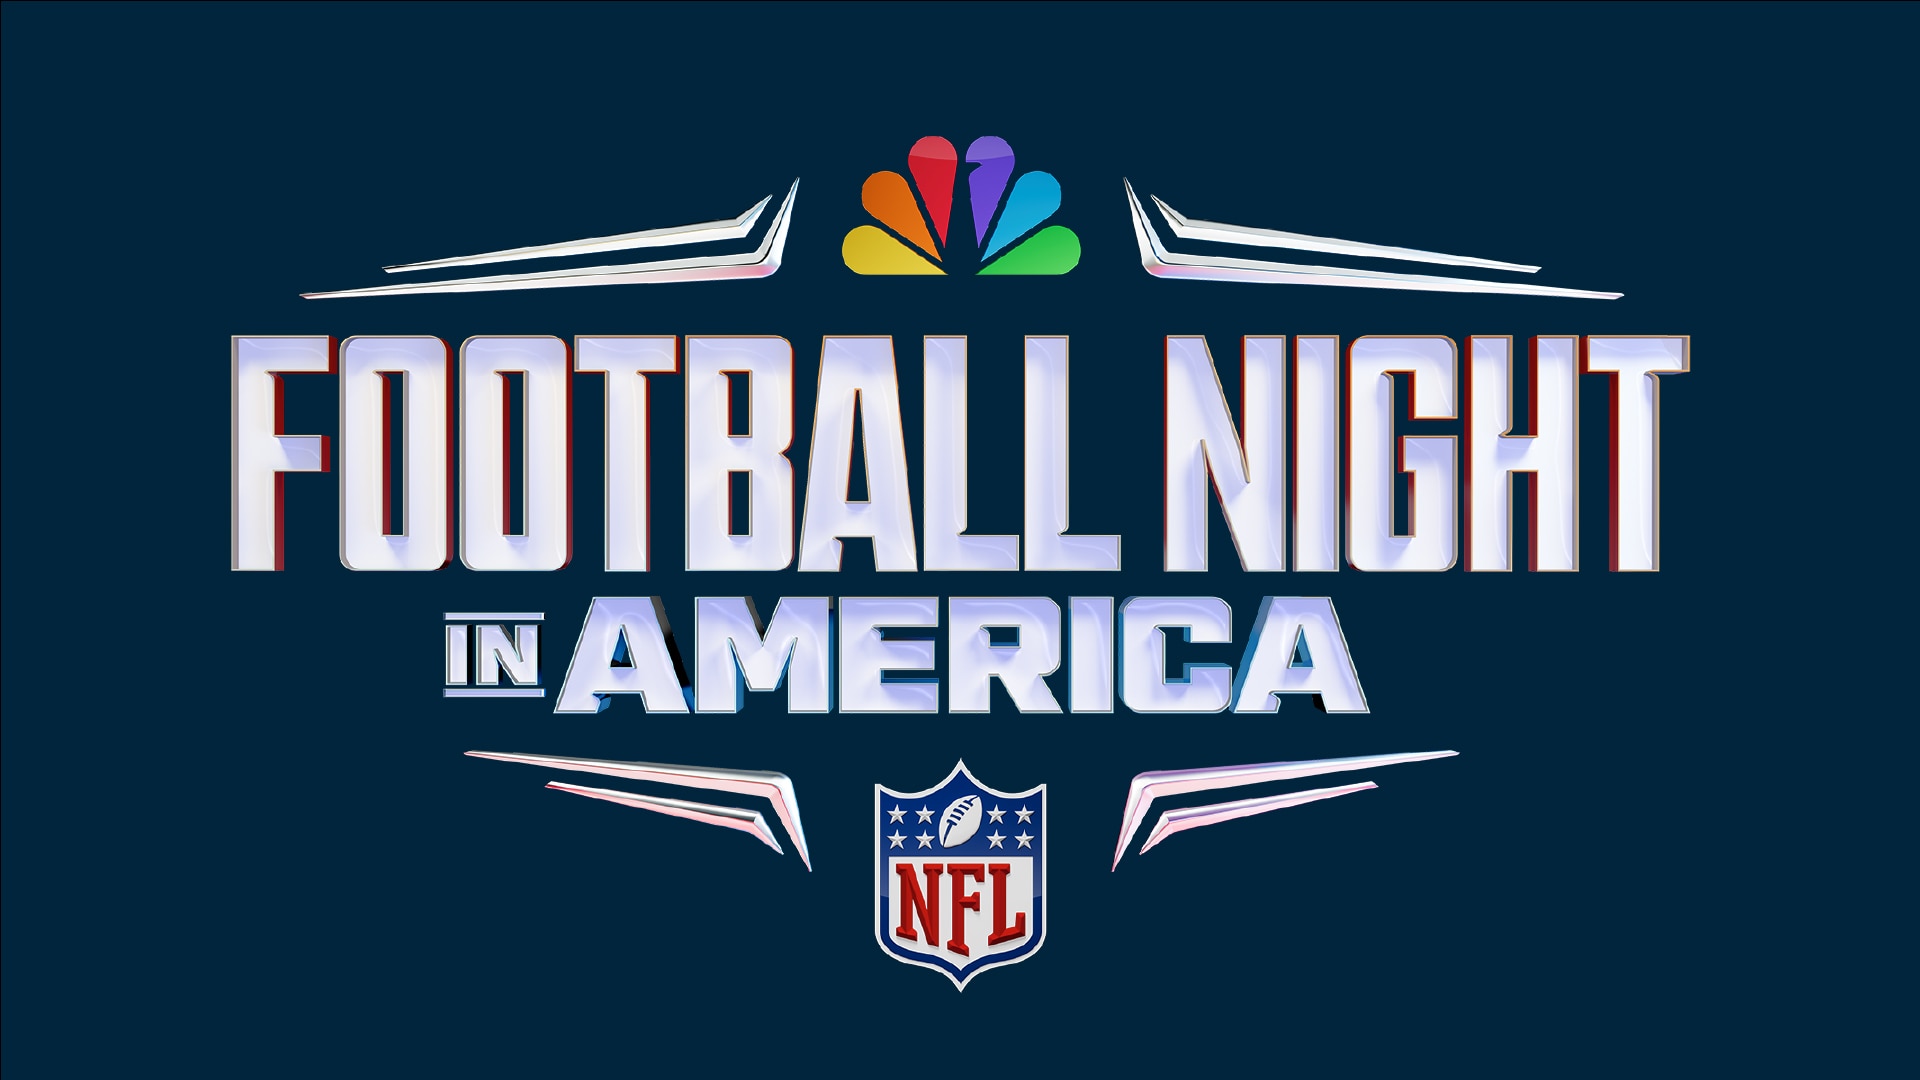 NBC Sports - We've been waiting all day for Sunday night! Football Night in  America starts now on NBC! #FNIA